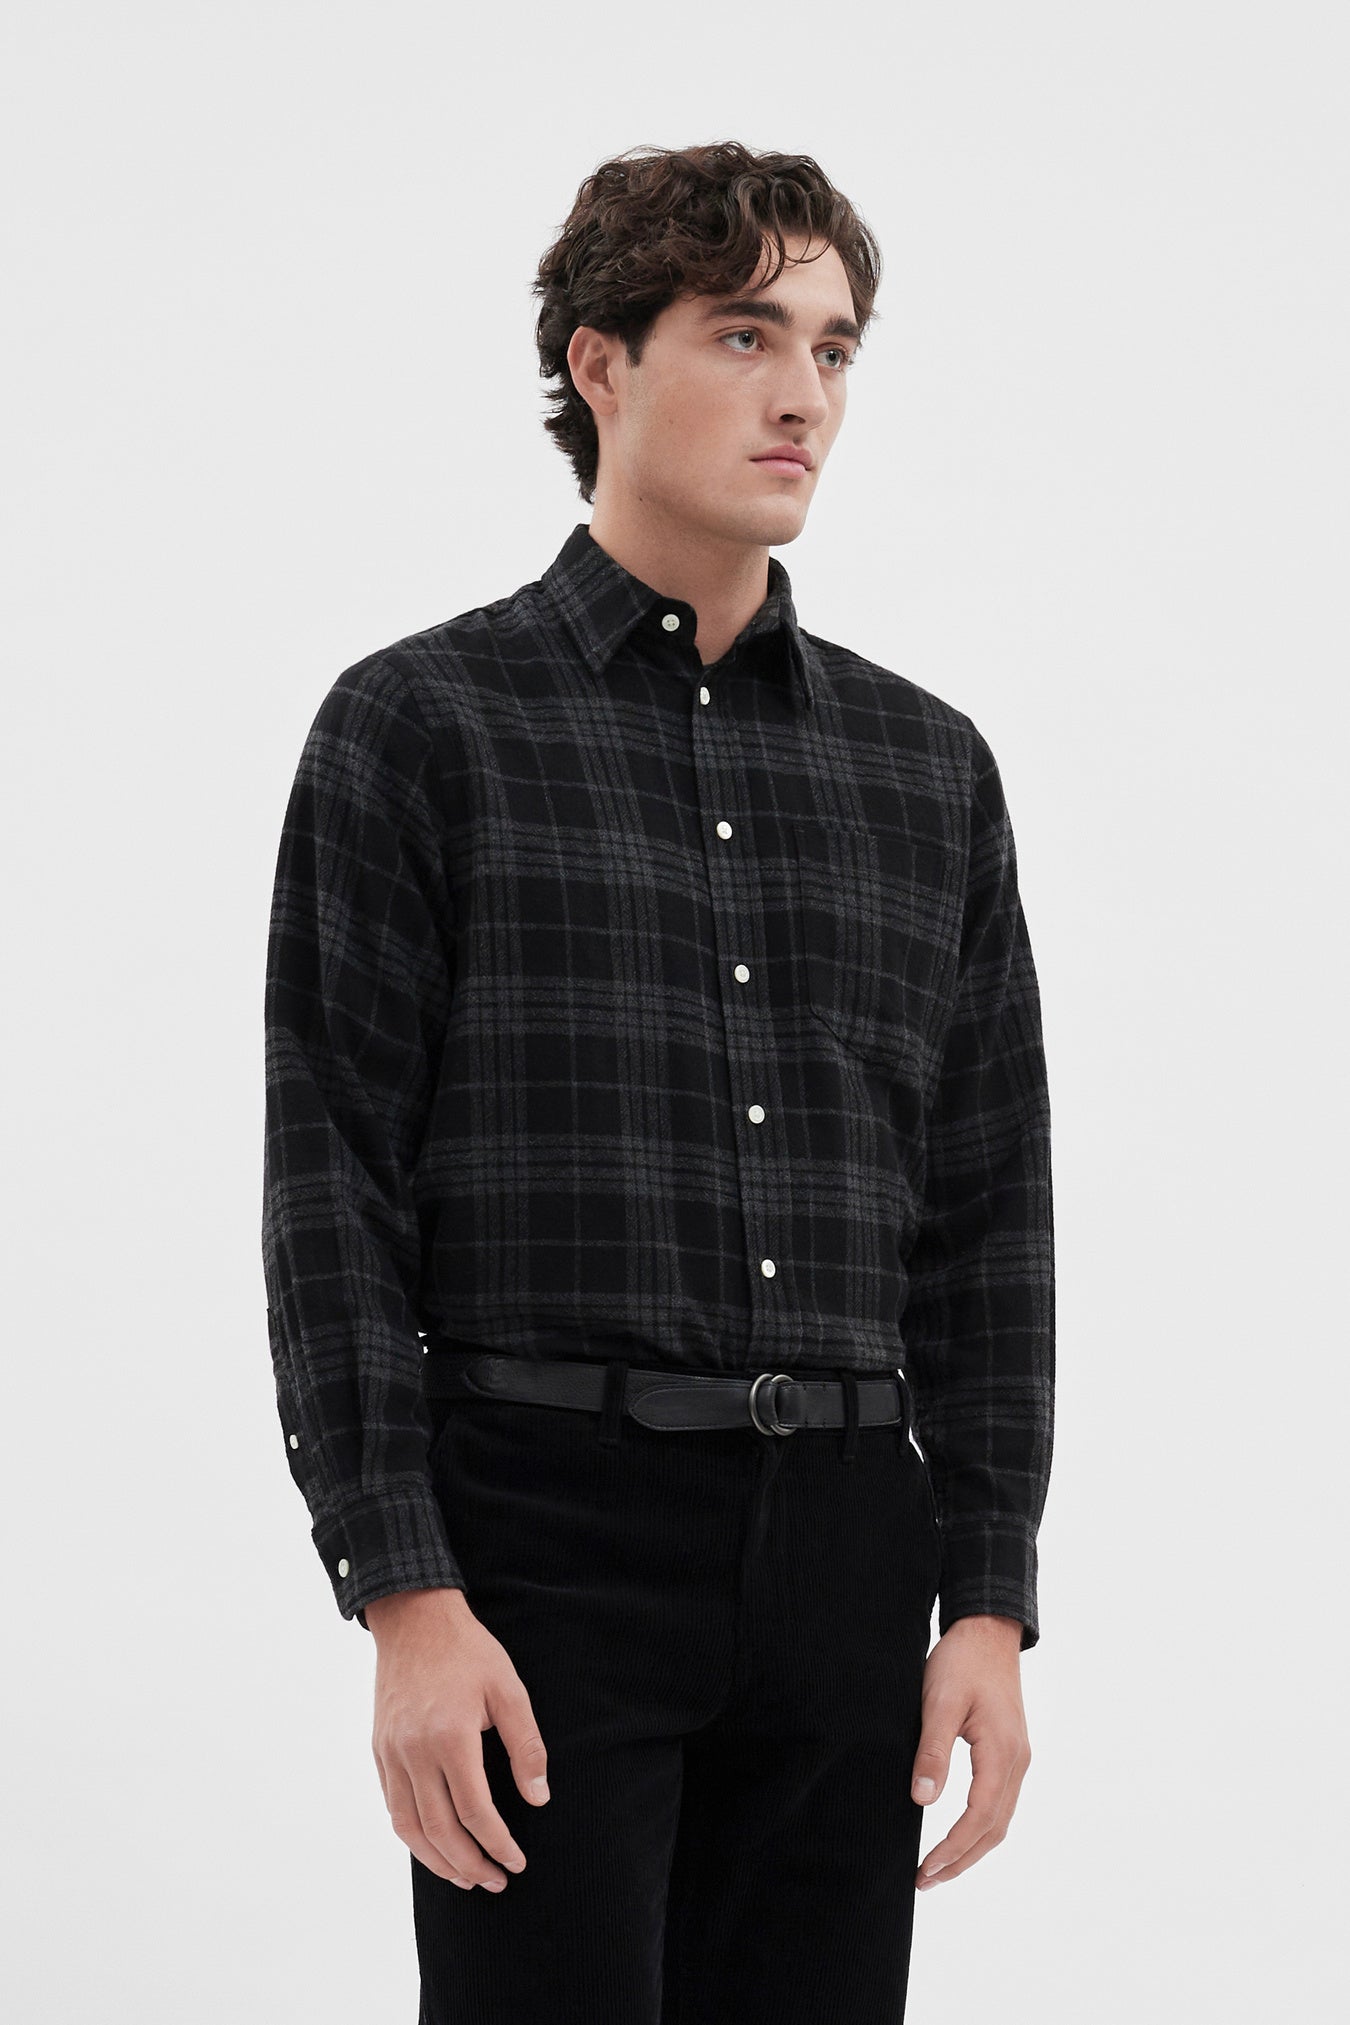 Norse Projects Algot Relaxed Wool Check Shirt